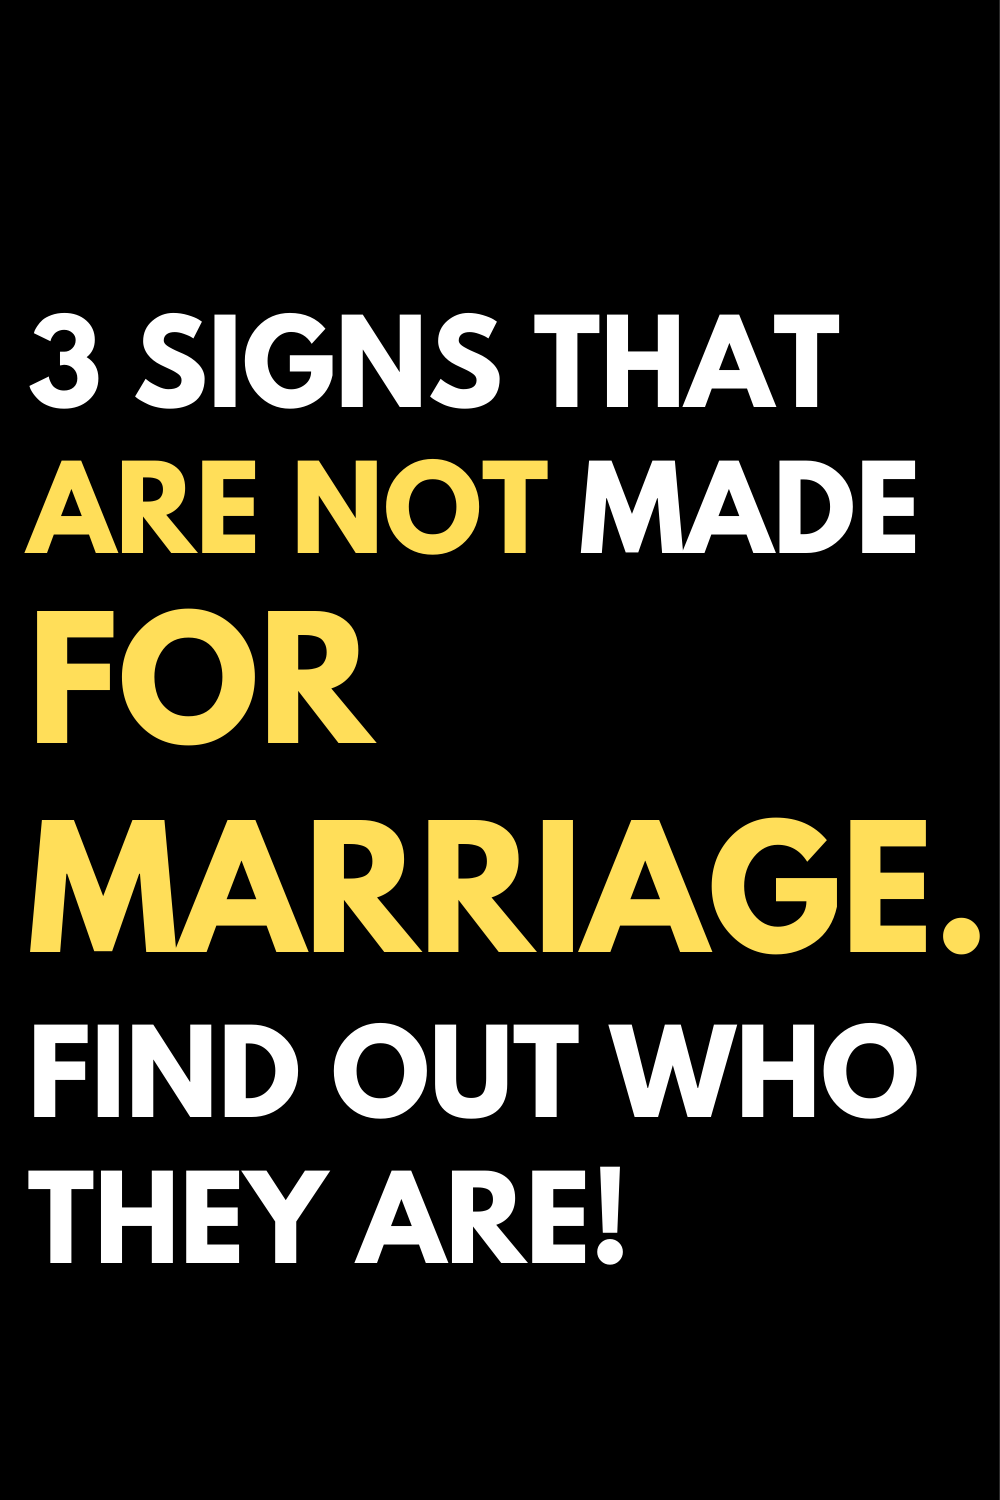 3 signs that are not made for marriage. Find out who they are!